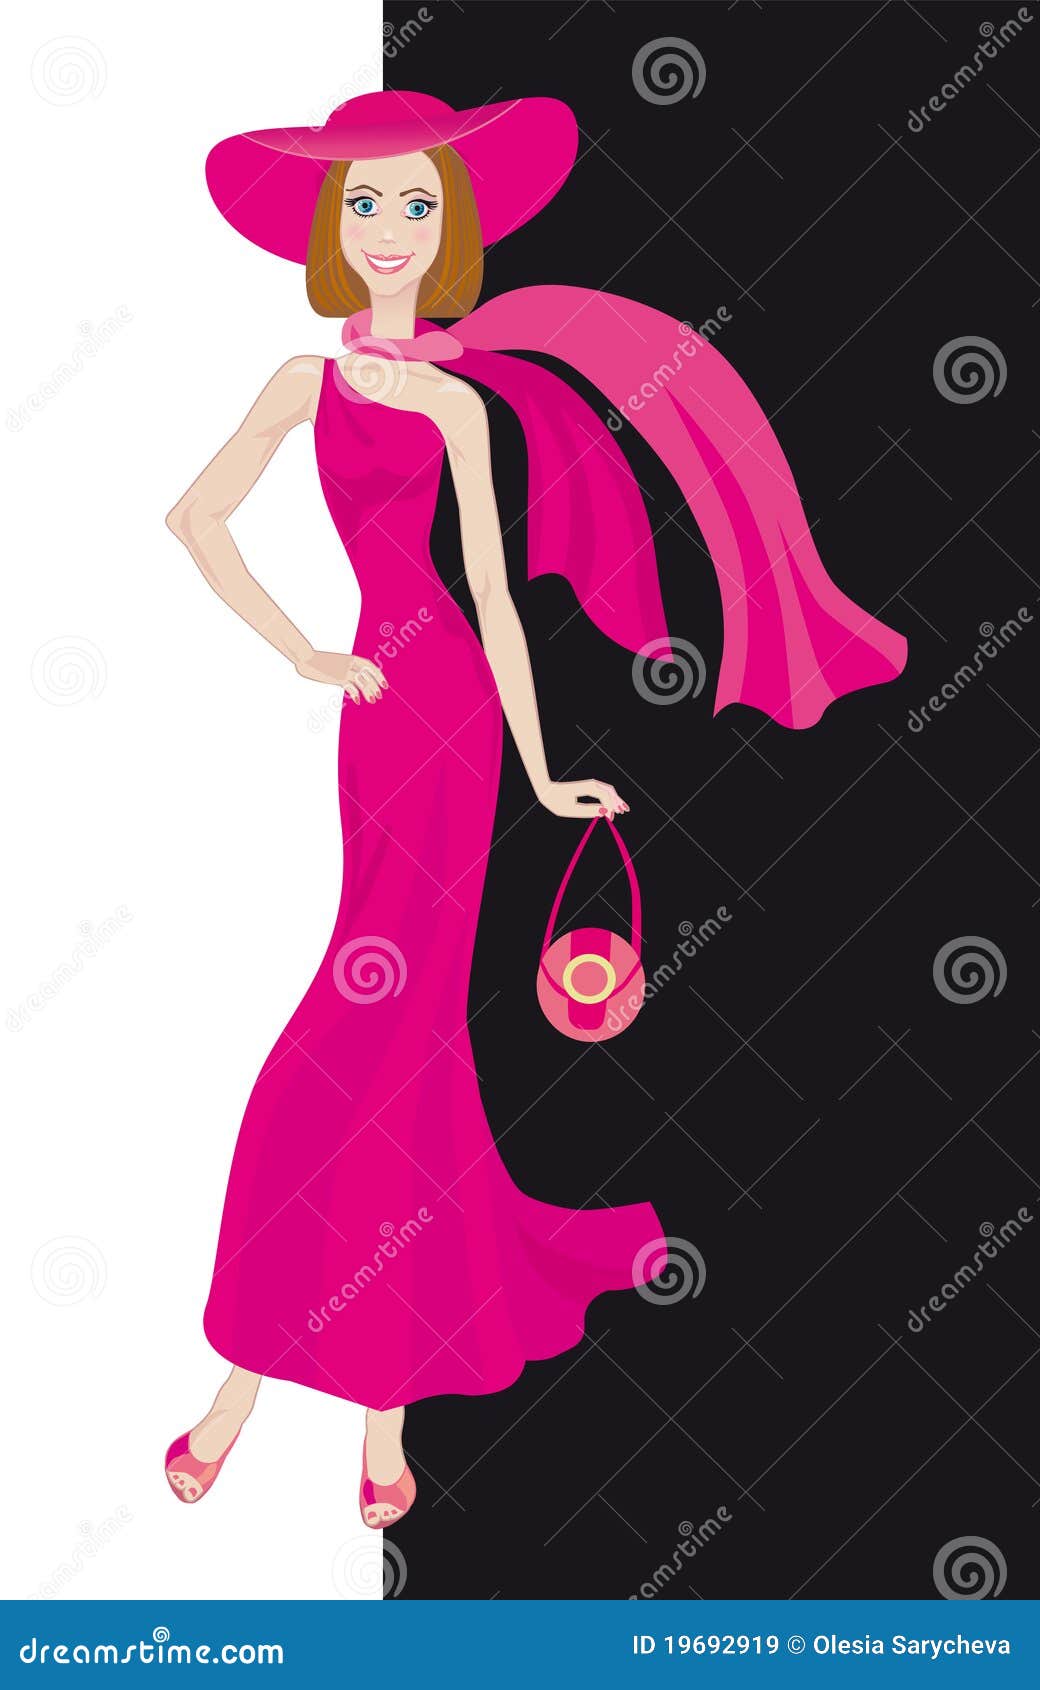 Glamour Lady In Pink Dress Royalty Free Stock Images 